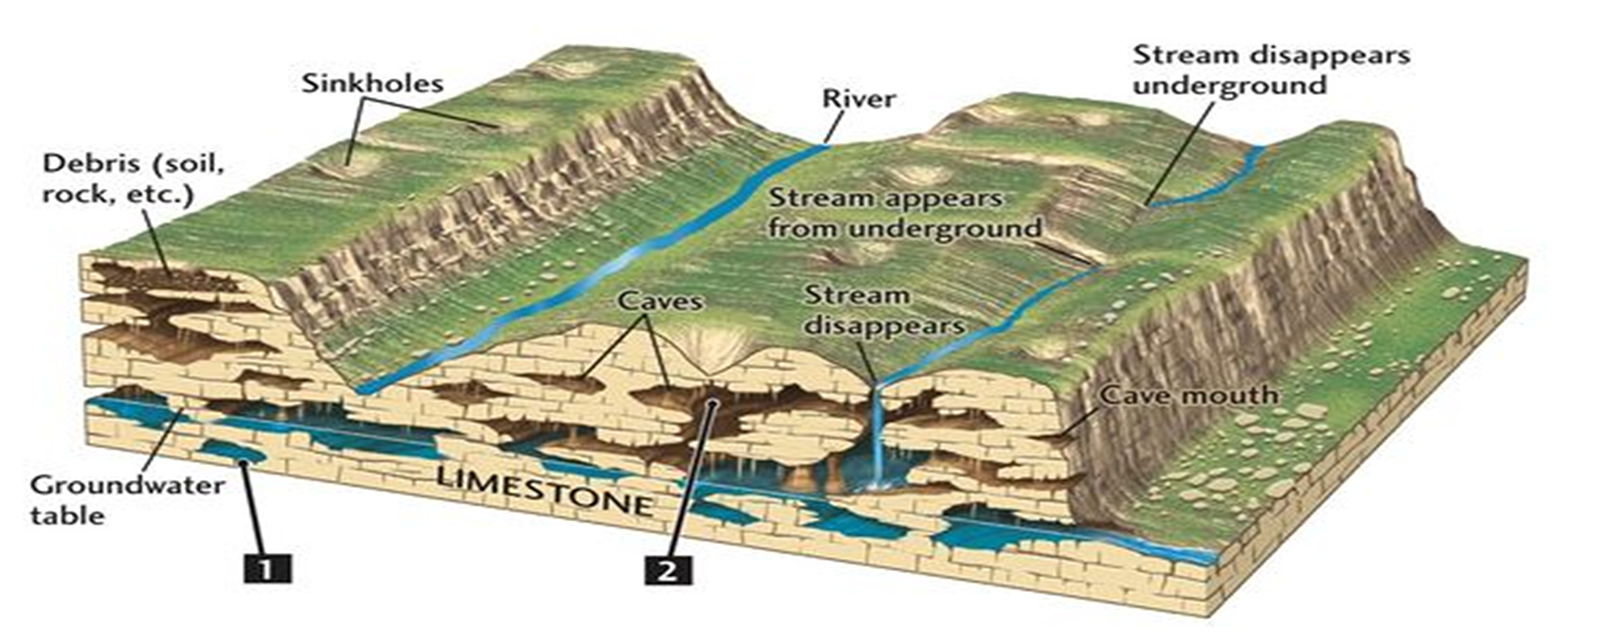 Features of karst groundwater systems.